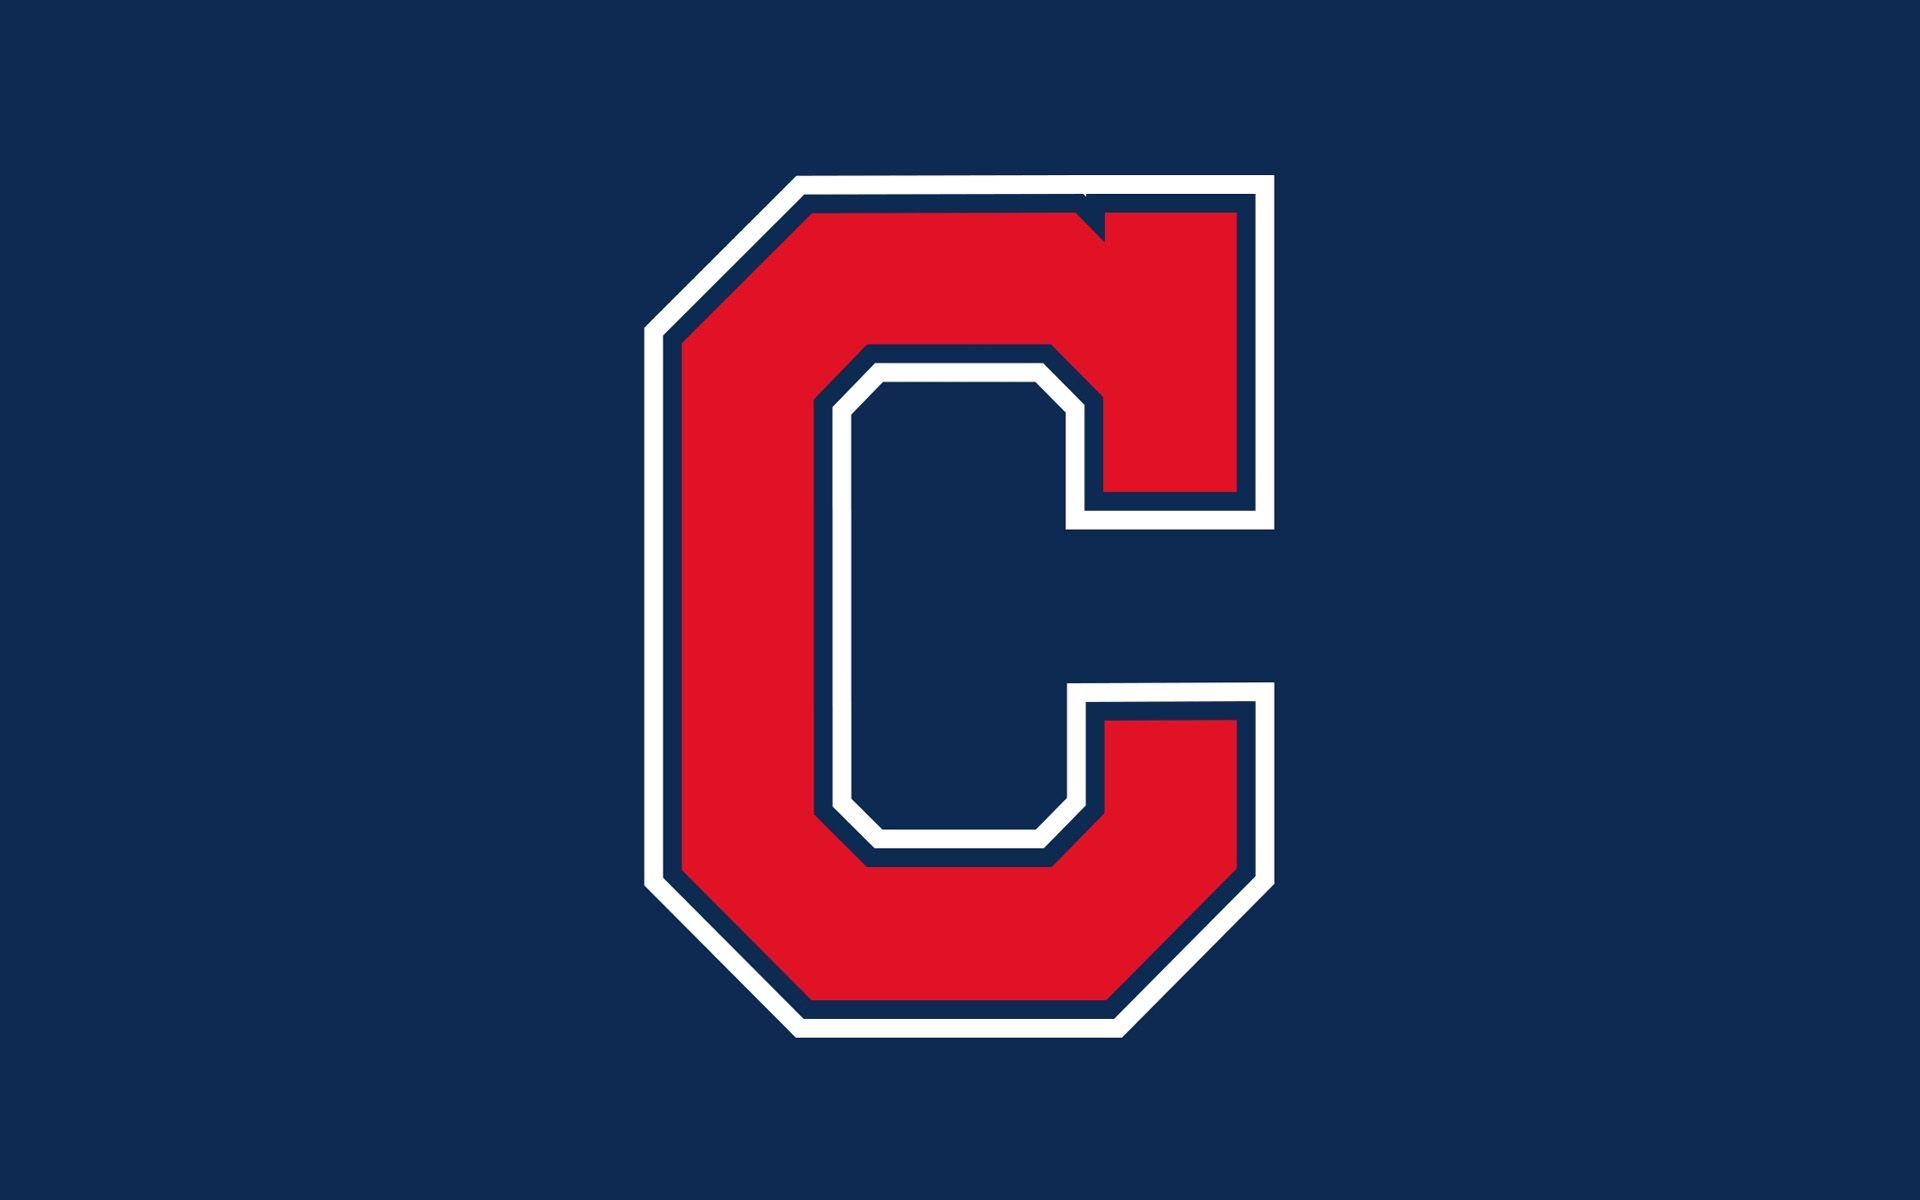 Cleveland Indians Wallpapers Wallpaper Cave